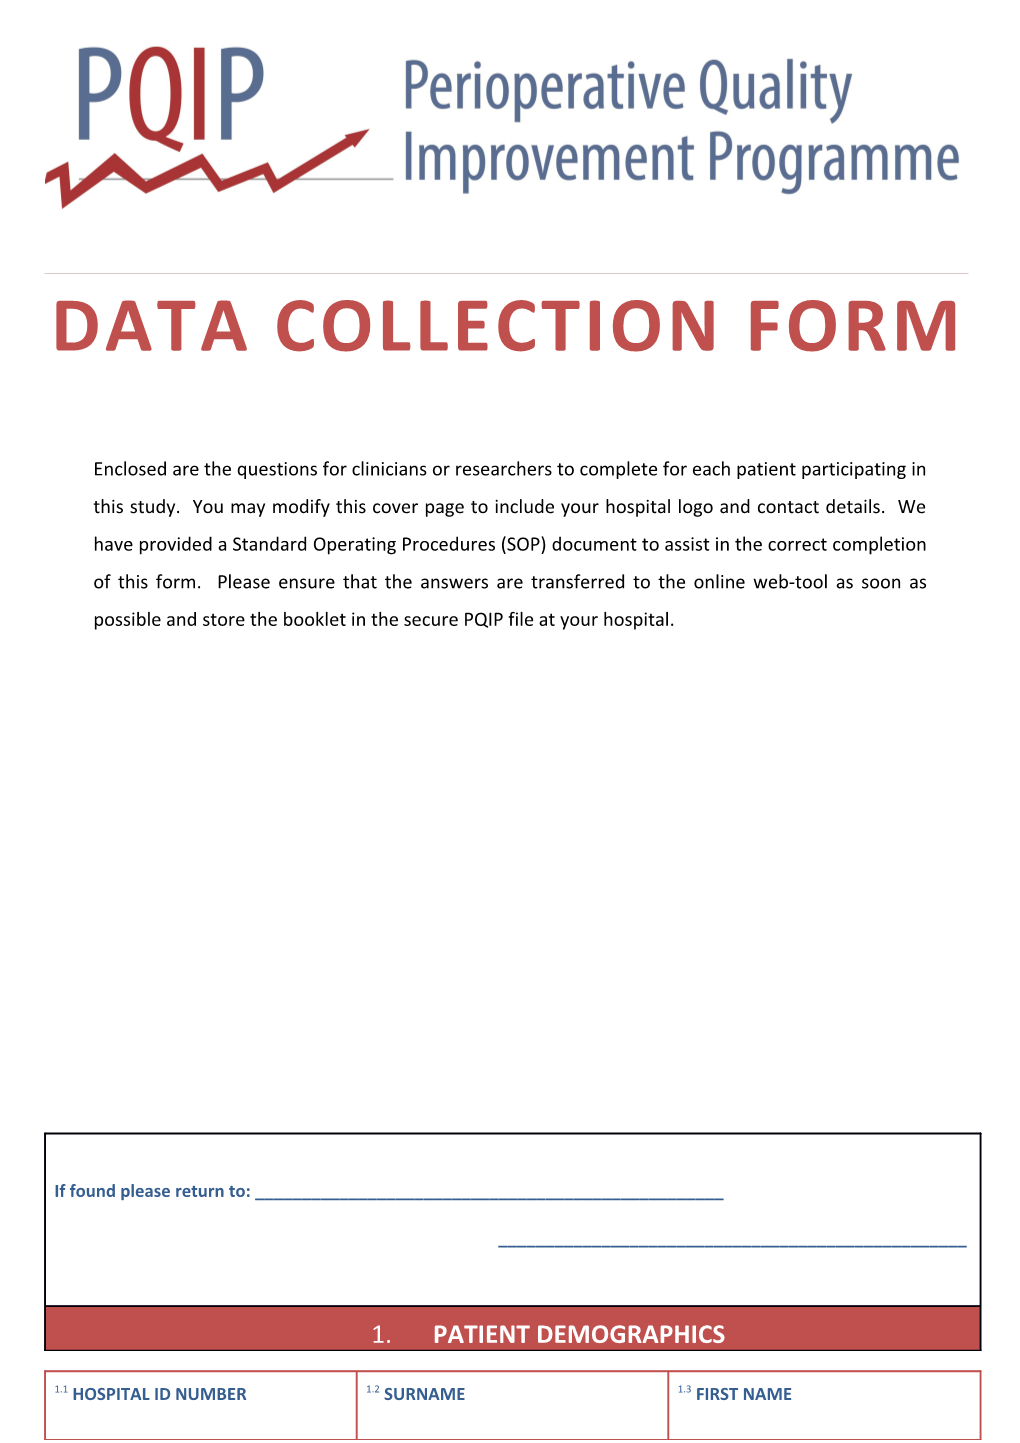 Data COLLECTION FORM s1